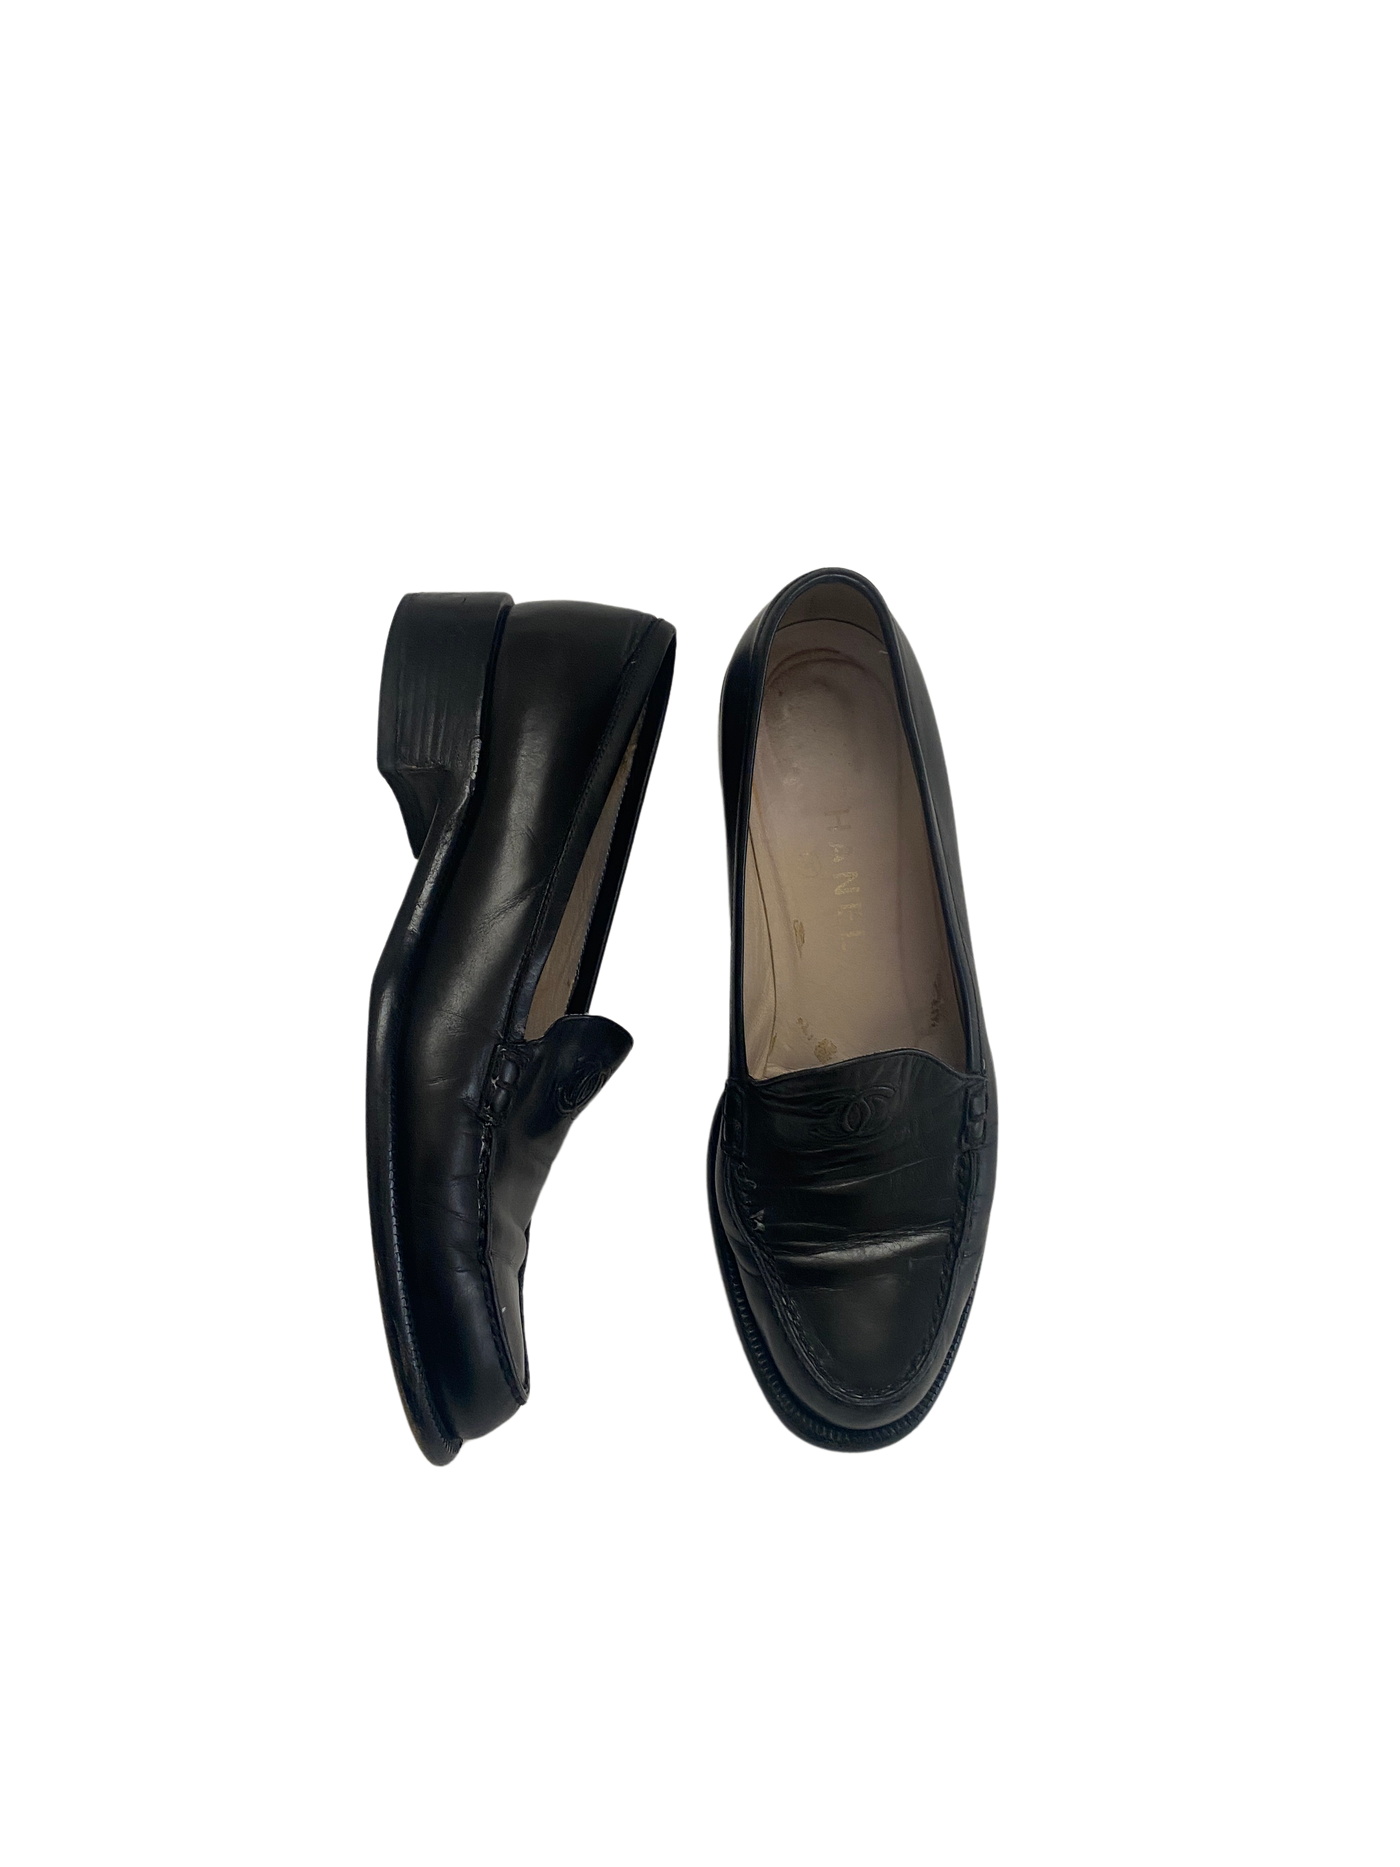 Chanel Black Loafers, 38.5